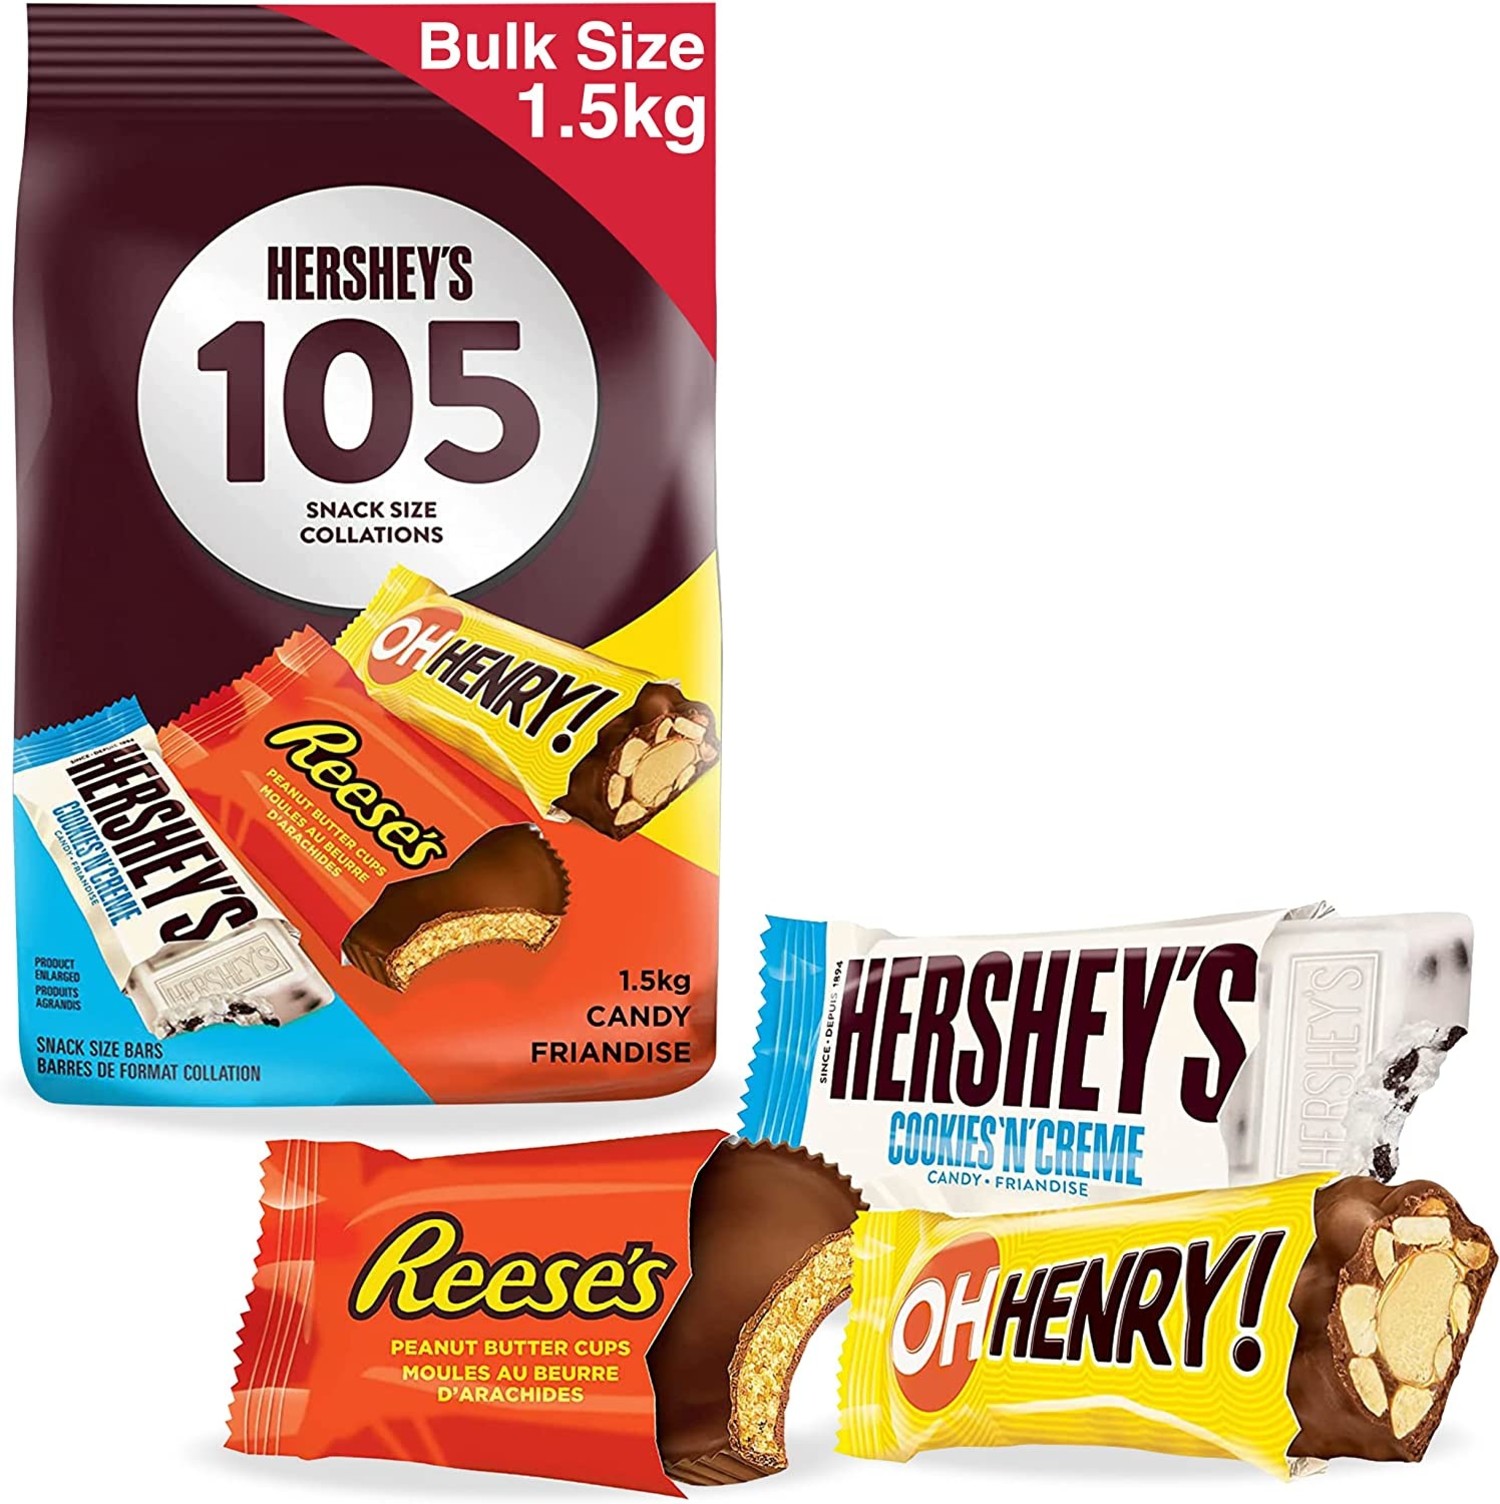 HERSHEY'S 105ct Assorted Valentine's Day Chocolate Candy, Candy to